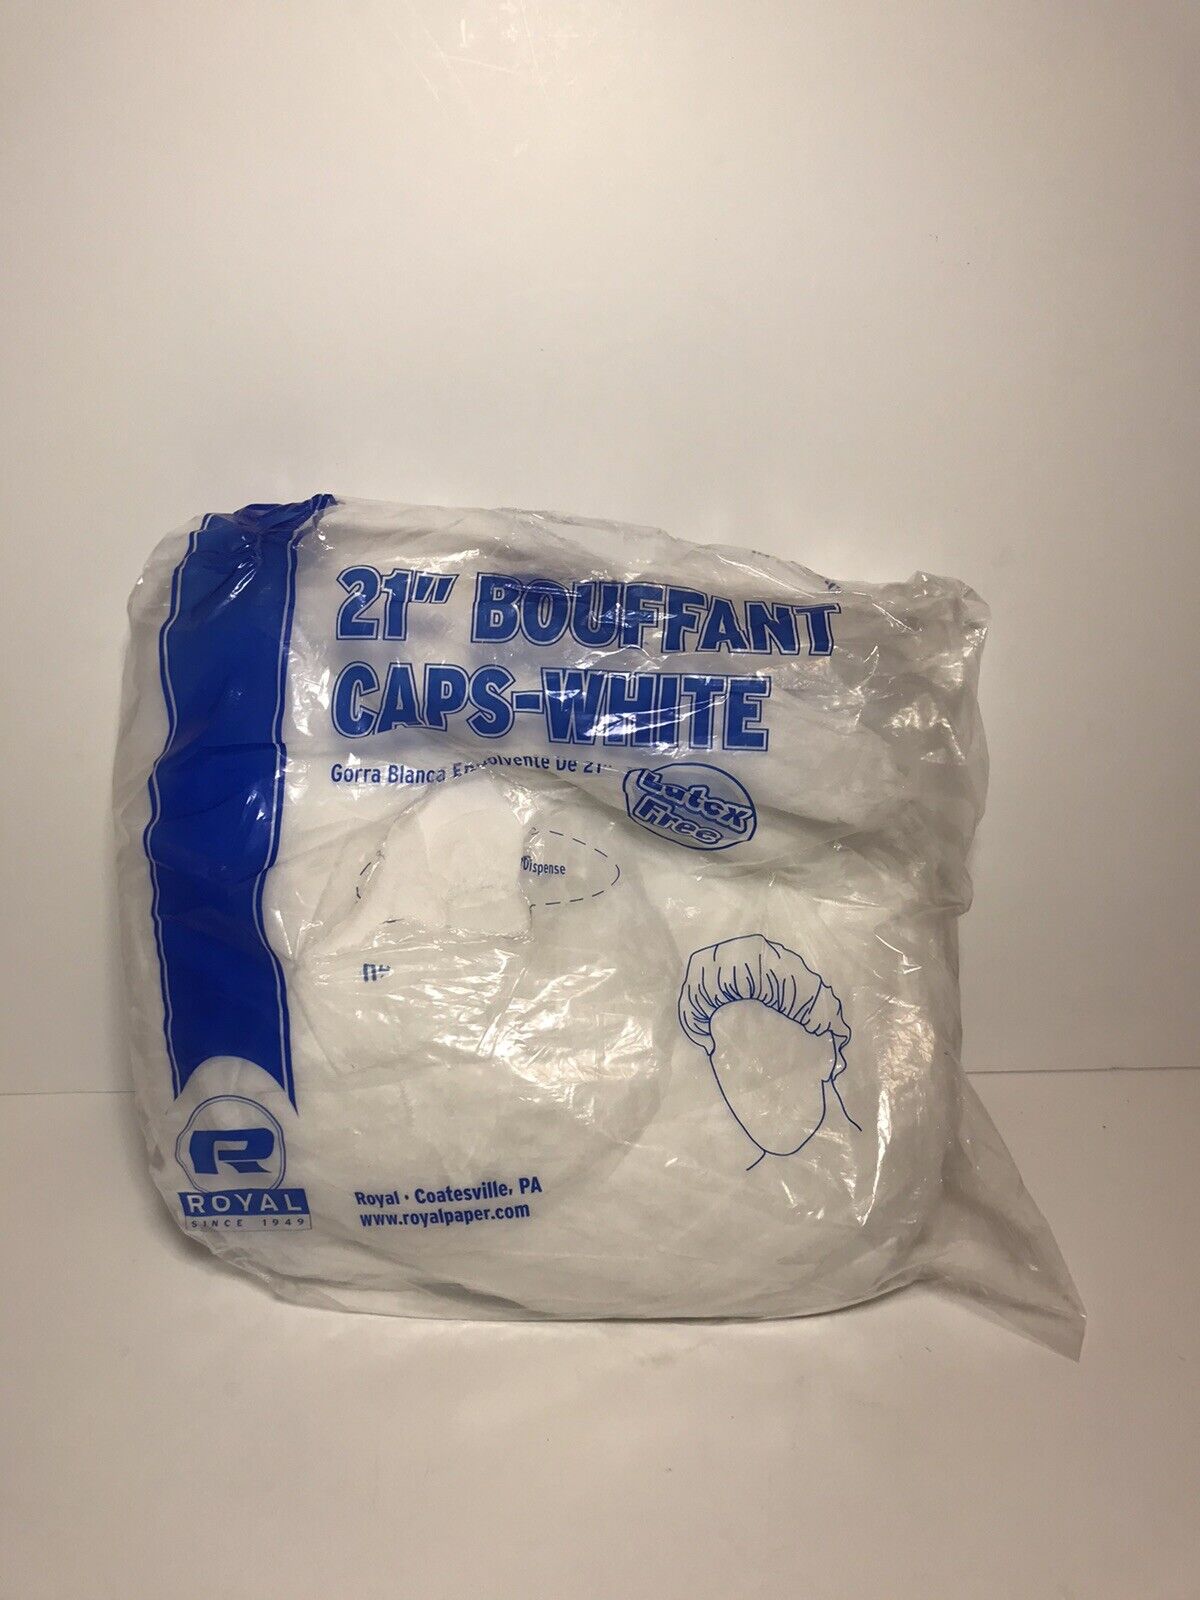 Royal 21” Bouffant Caps-White Latex Free 100 Count